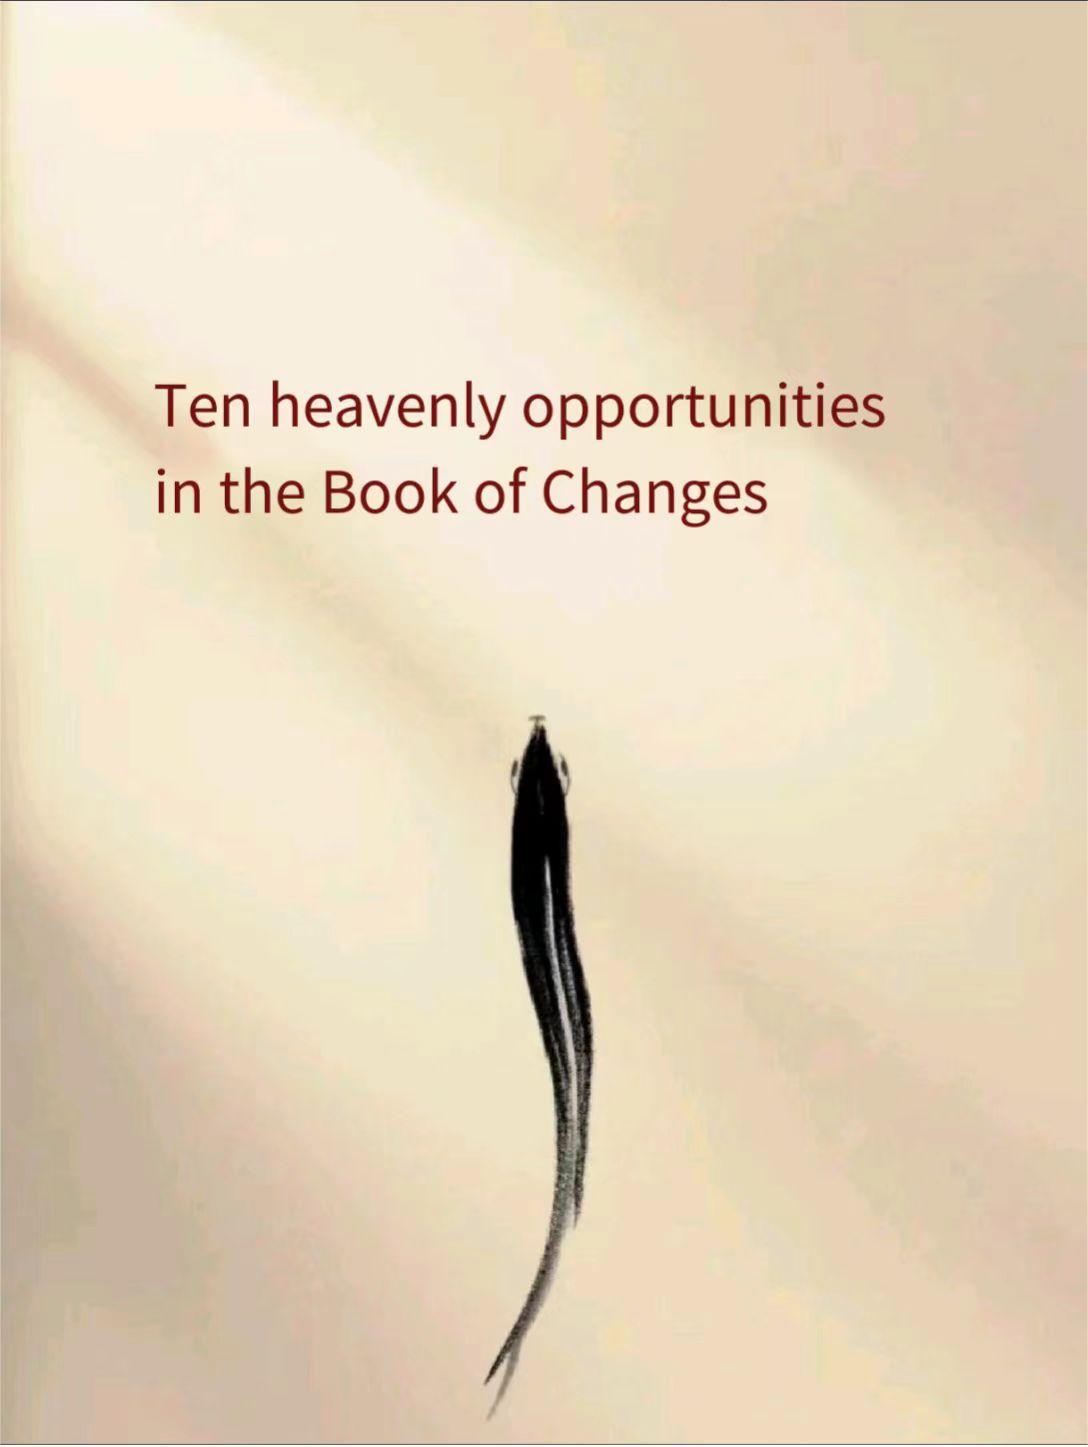 The ten heavenly secrets in the Book of Changes, each of which contains great wisdom